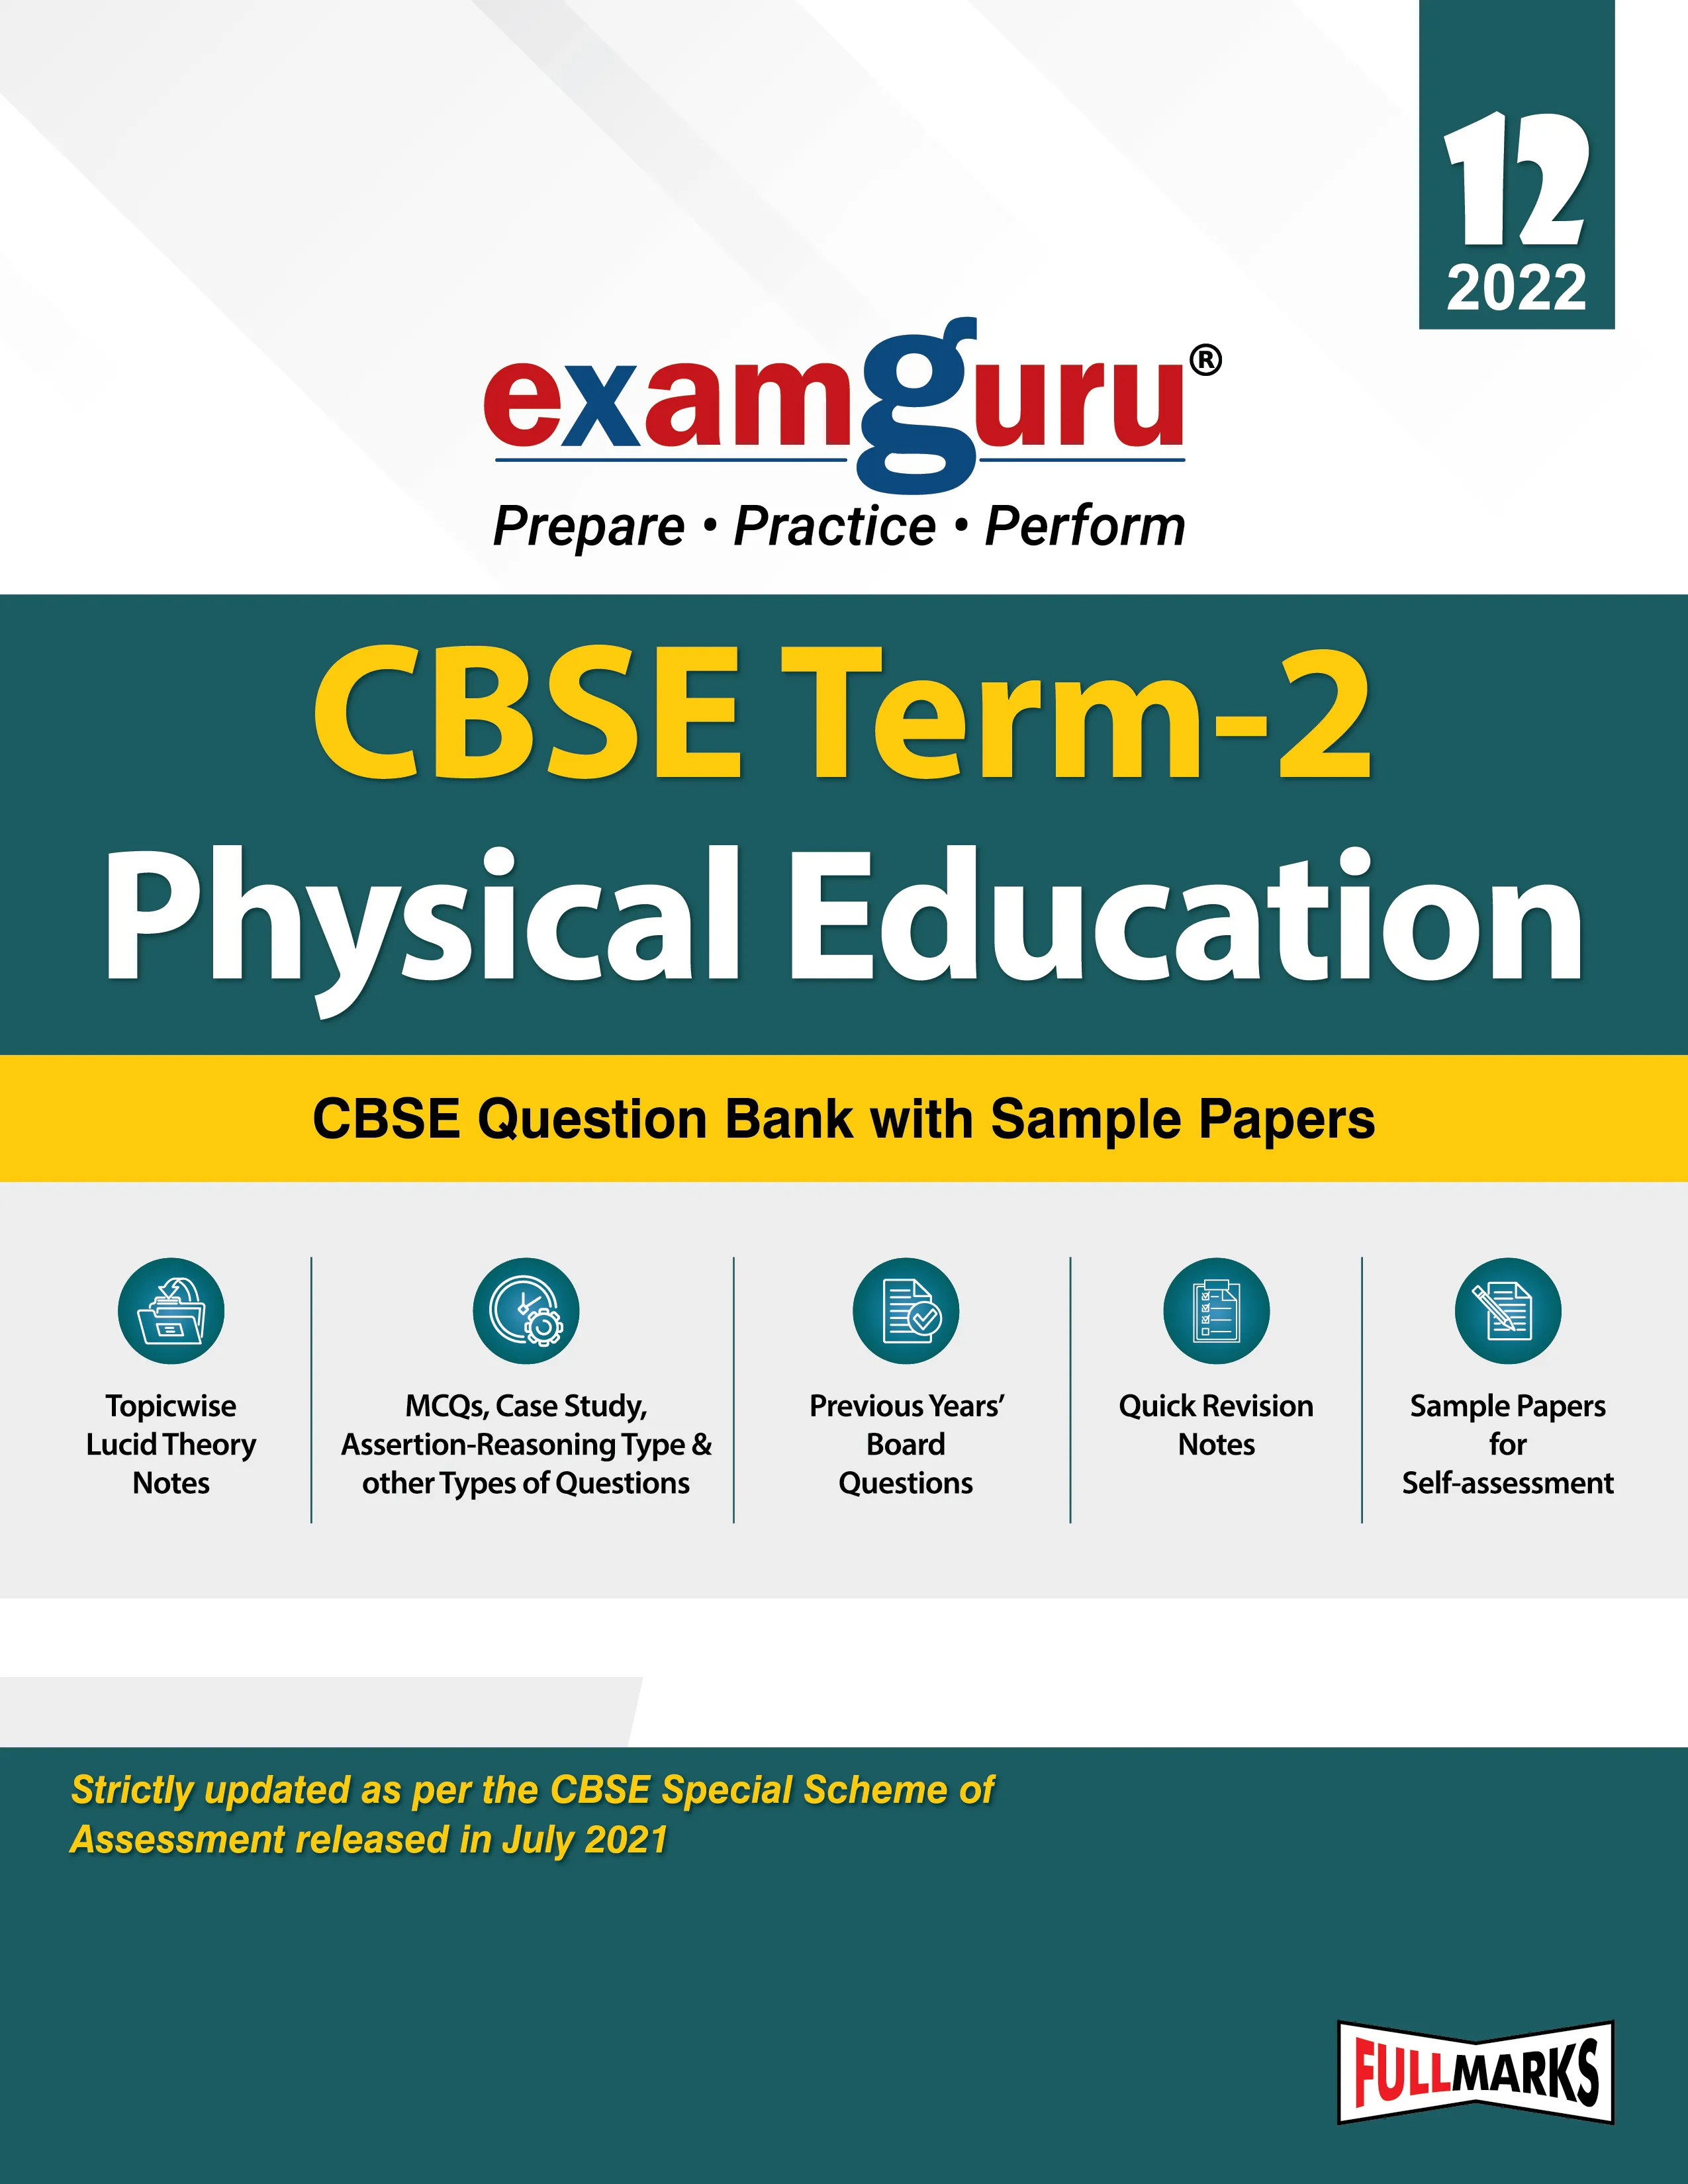 Examguru-Physical Education-12 Term 2 for 2022 Exam (Cover Theory and MCQs)